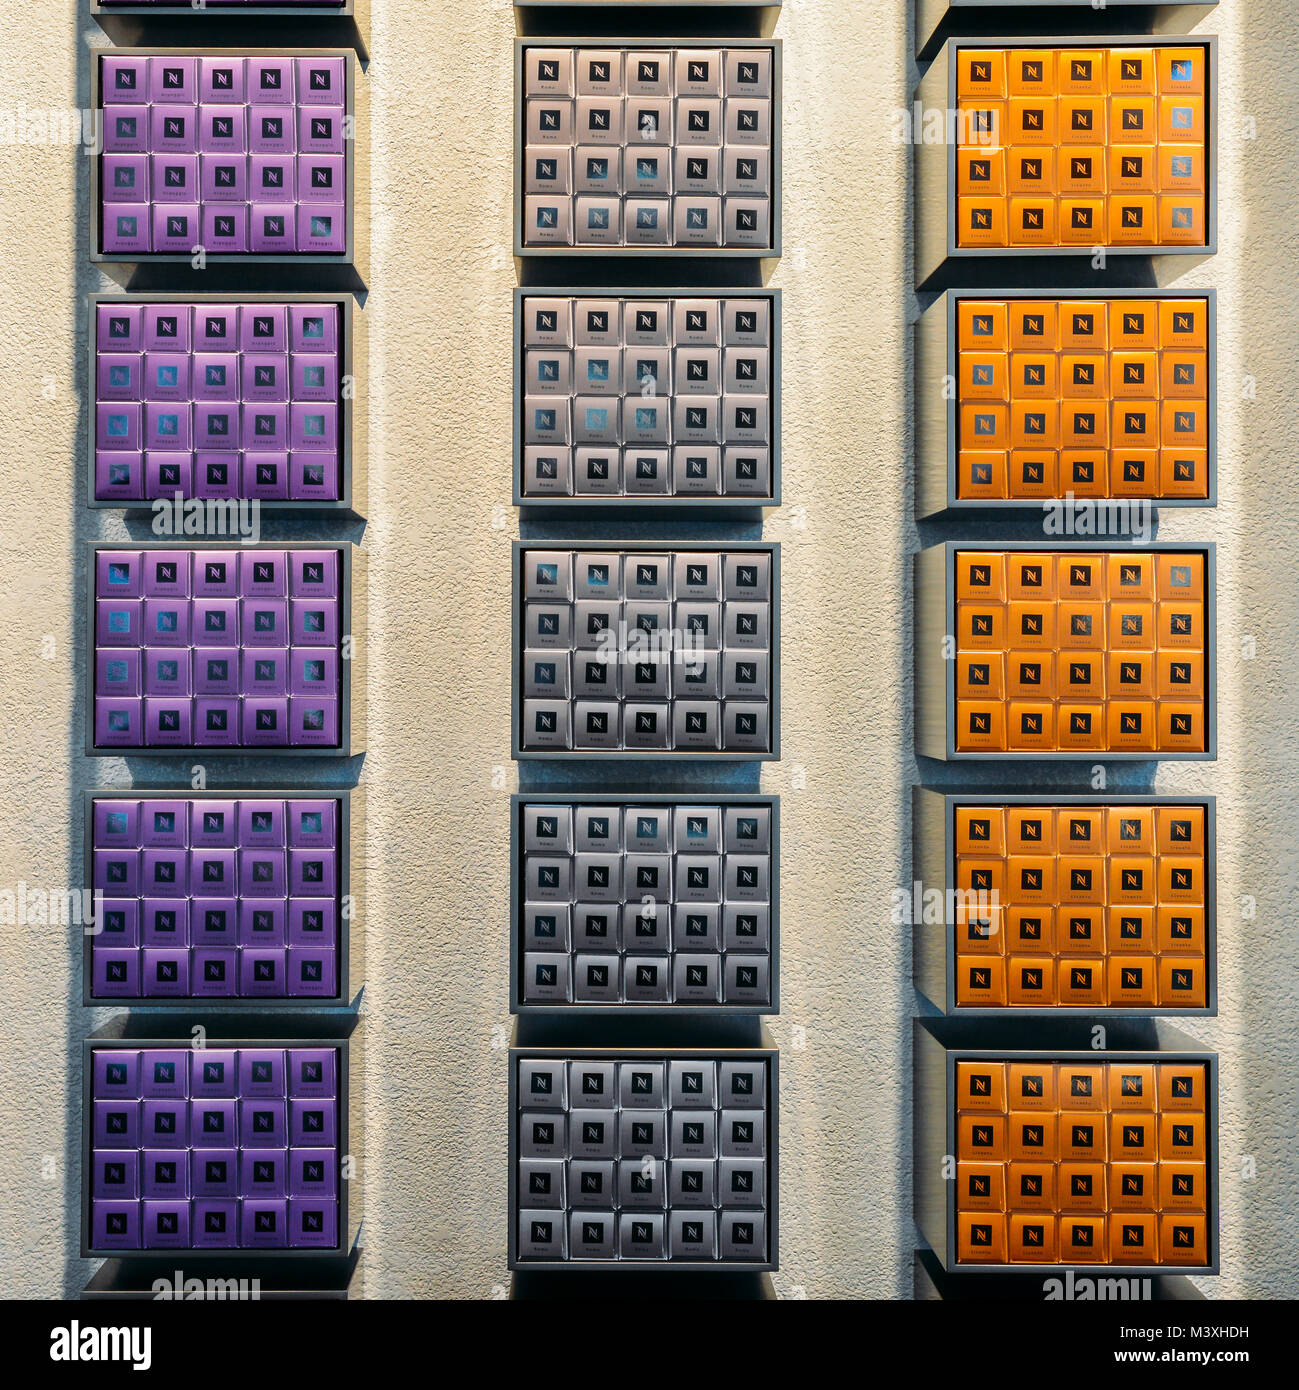 Milan, Italy - Feb 10, 2018: Nespresso coffee capsules of various flavours on display on wall of Nespresso shop in Milan, Italy Stock Photo